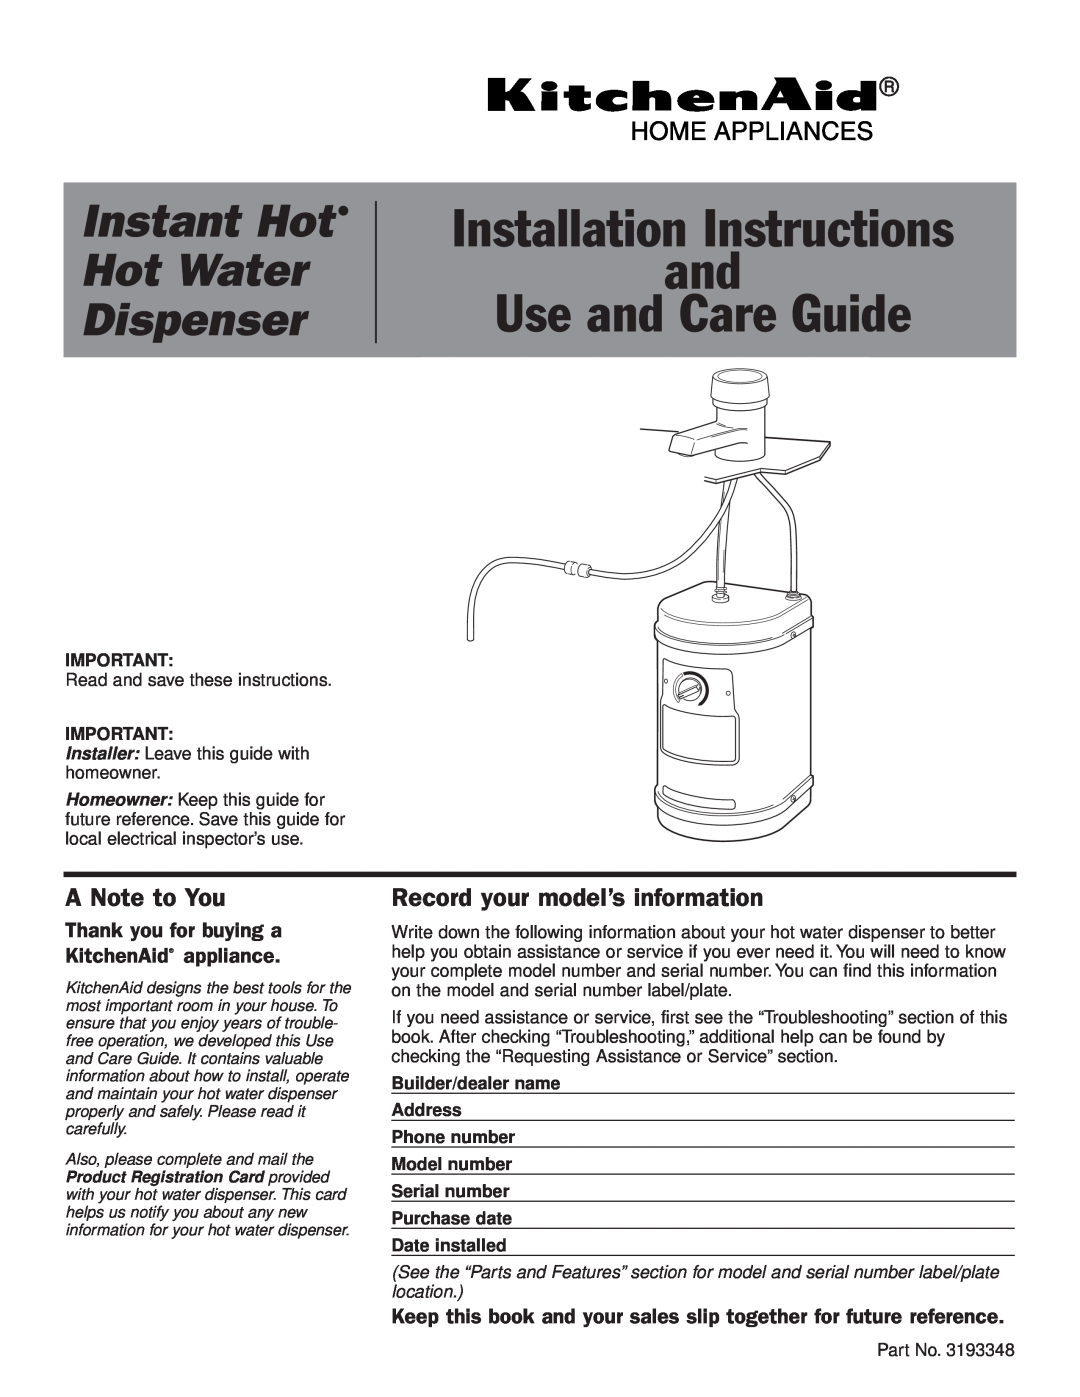 KitchenAid Instant Hot Hot Water Dispenser installation instructions A Note to You, Record your model’s information 